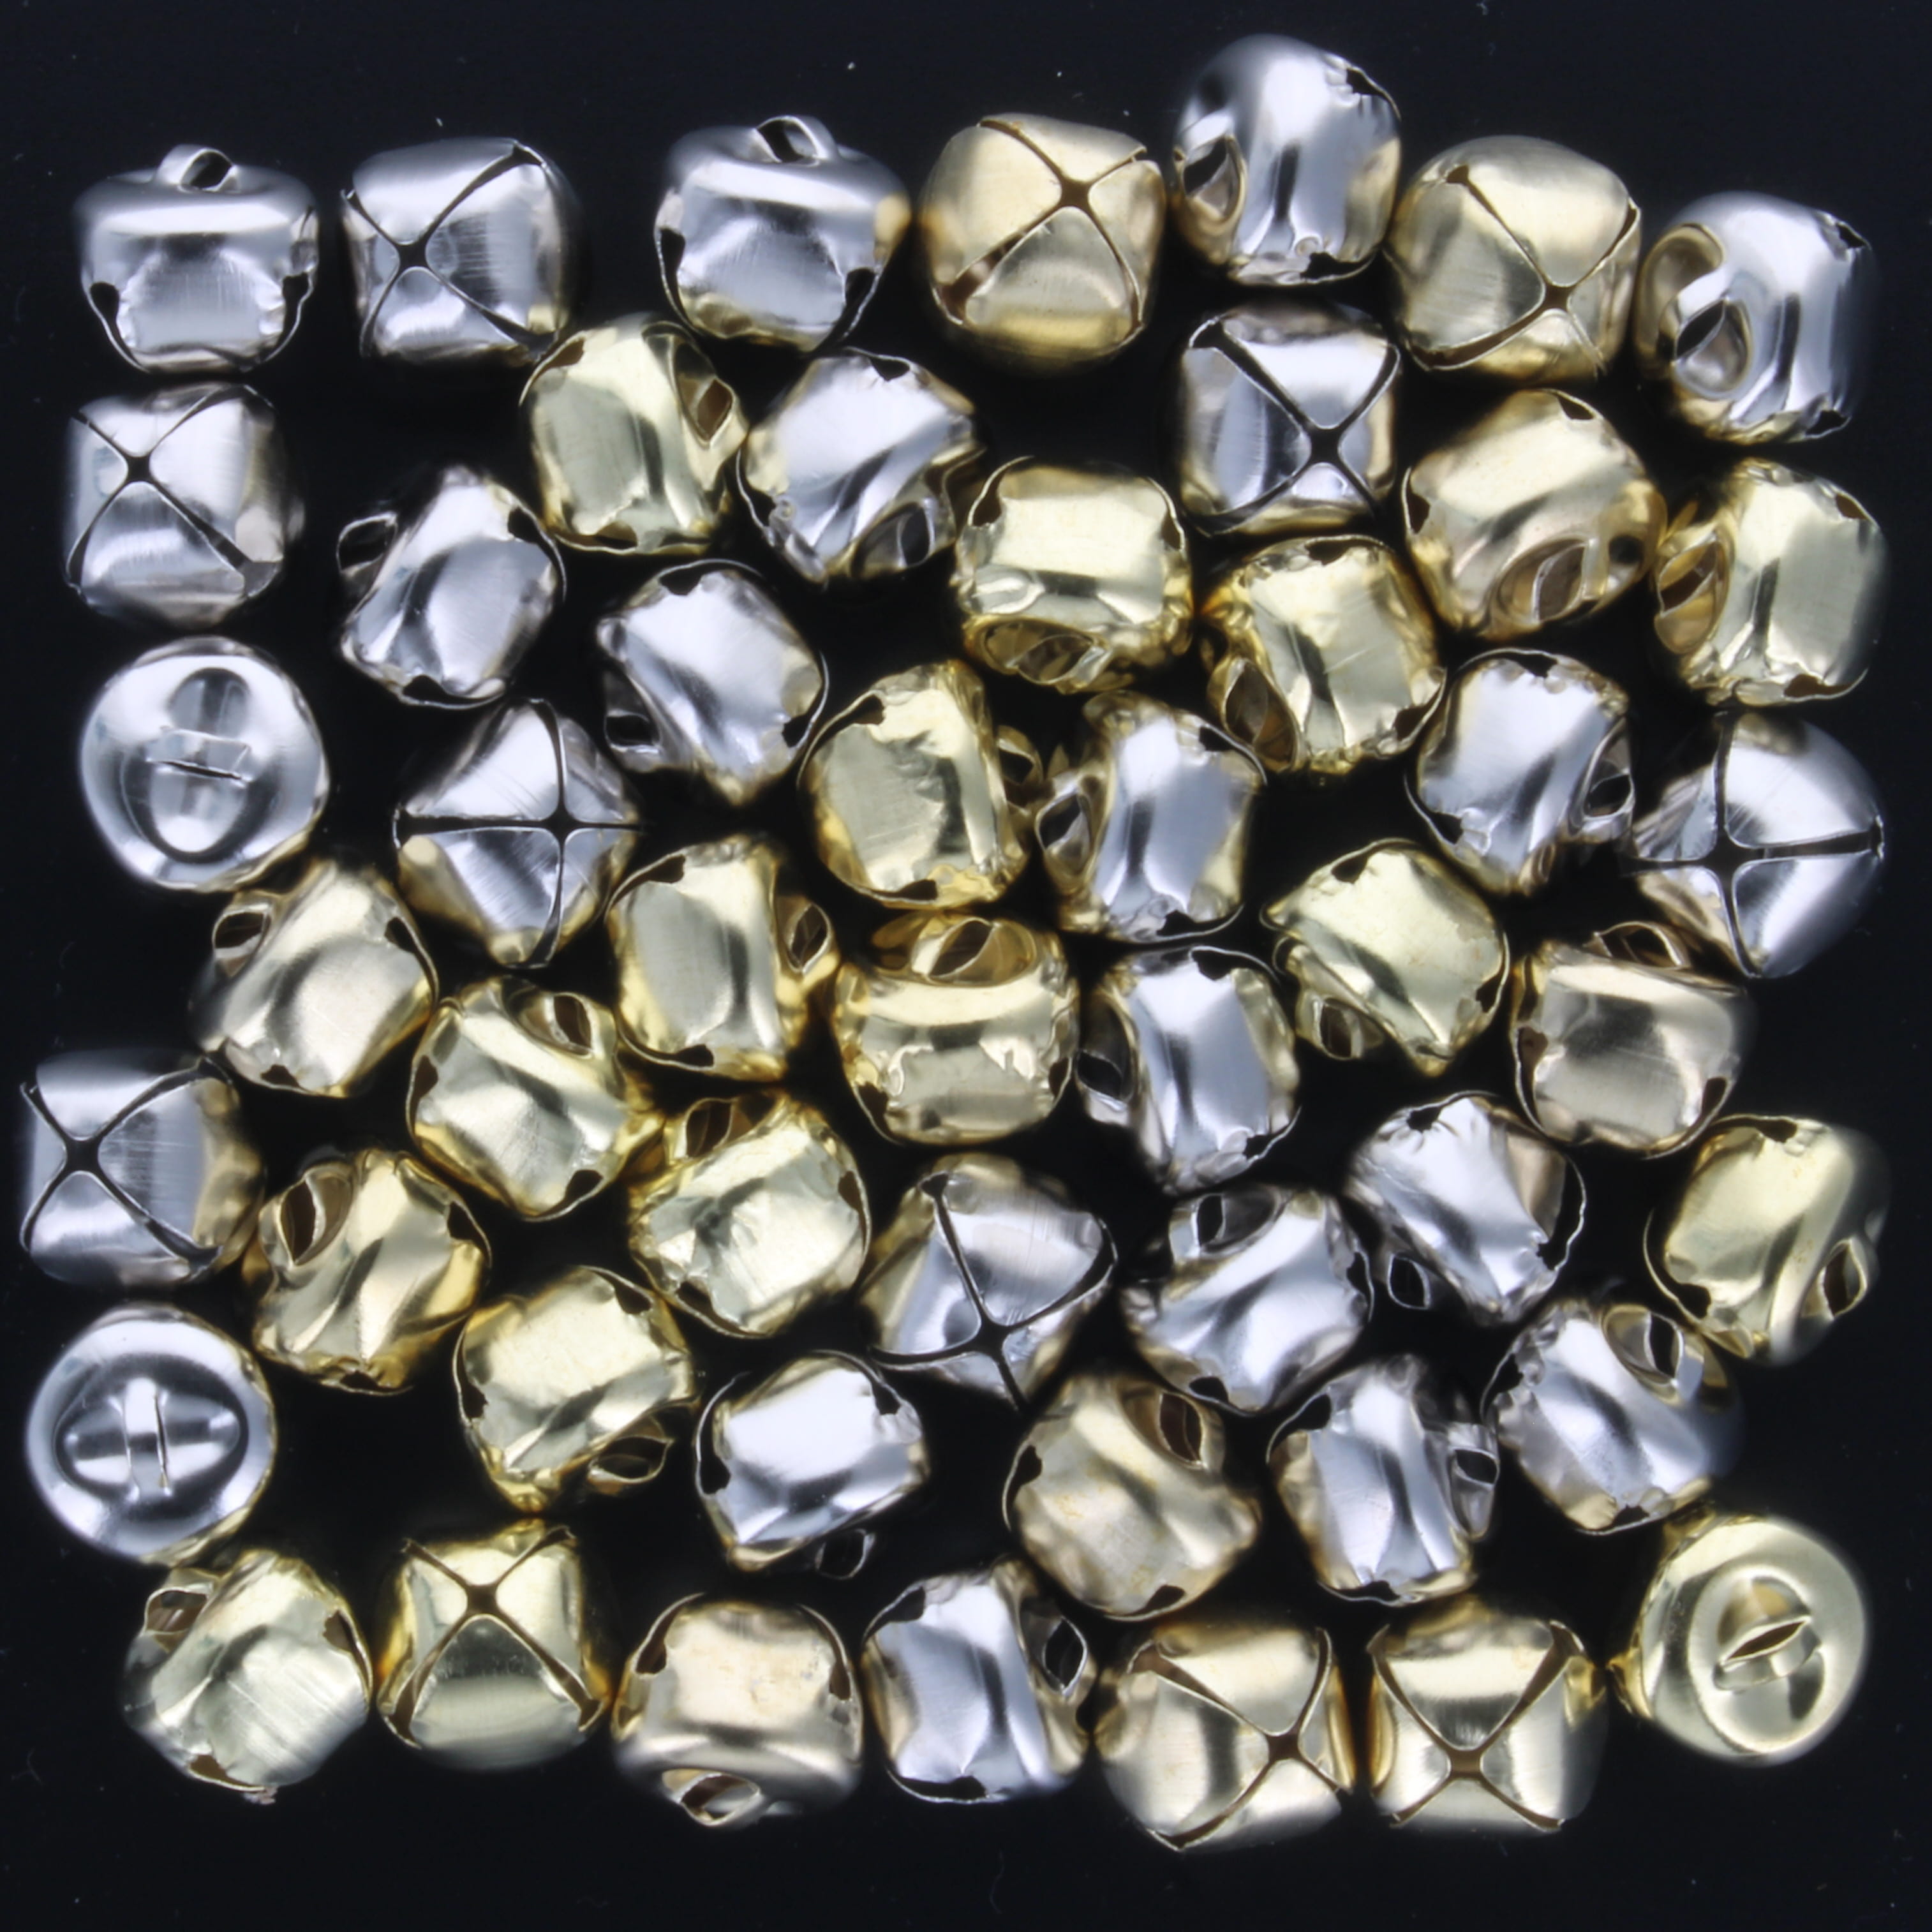 Jingle Bells Gold and Silver - 100g - STC80